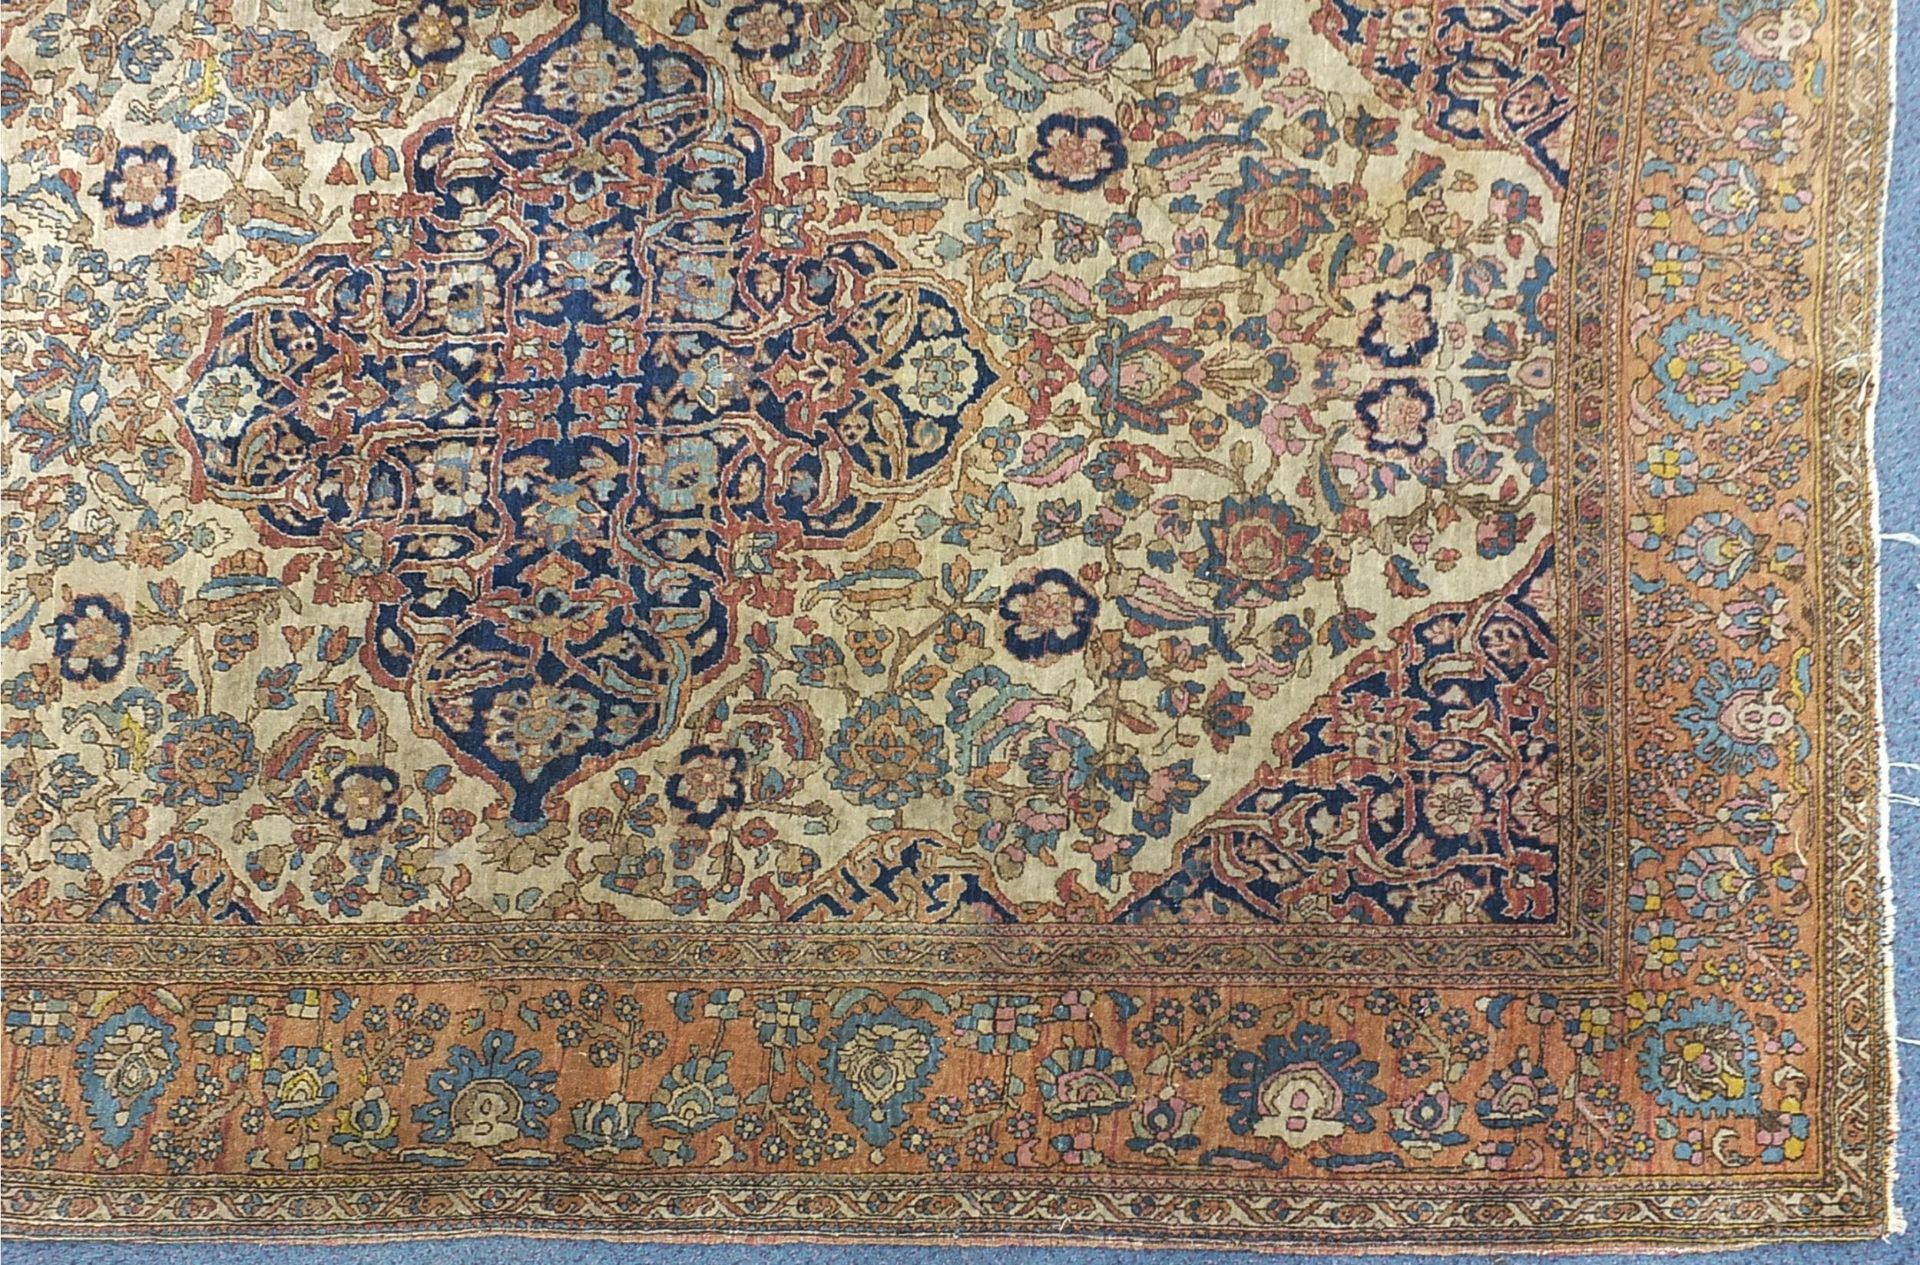 Rectangular beige and blue ground rug having an all over floral design, 205cm x 143cm - Image 5 of 6